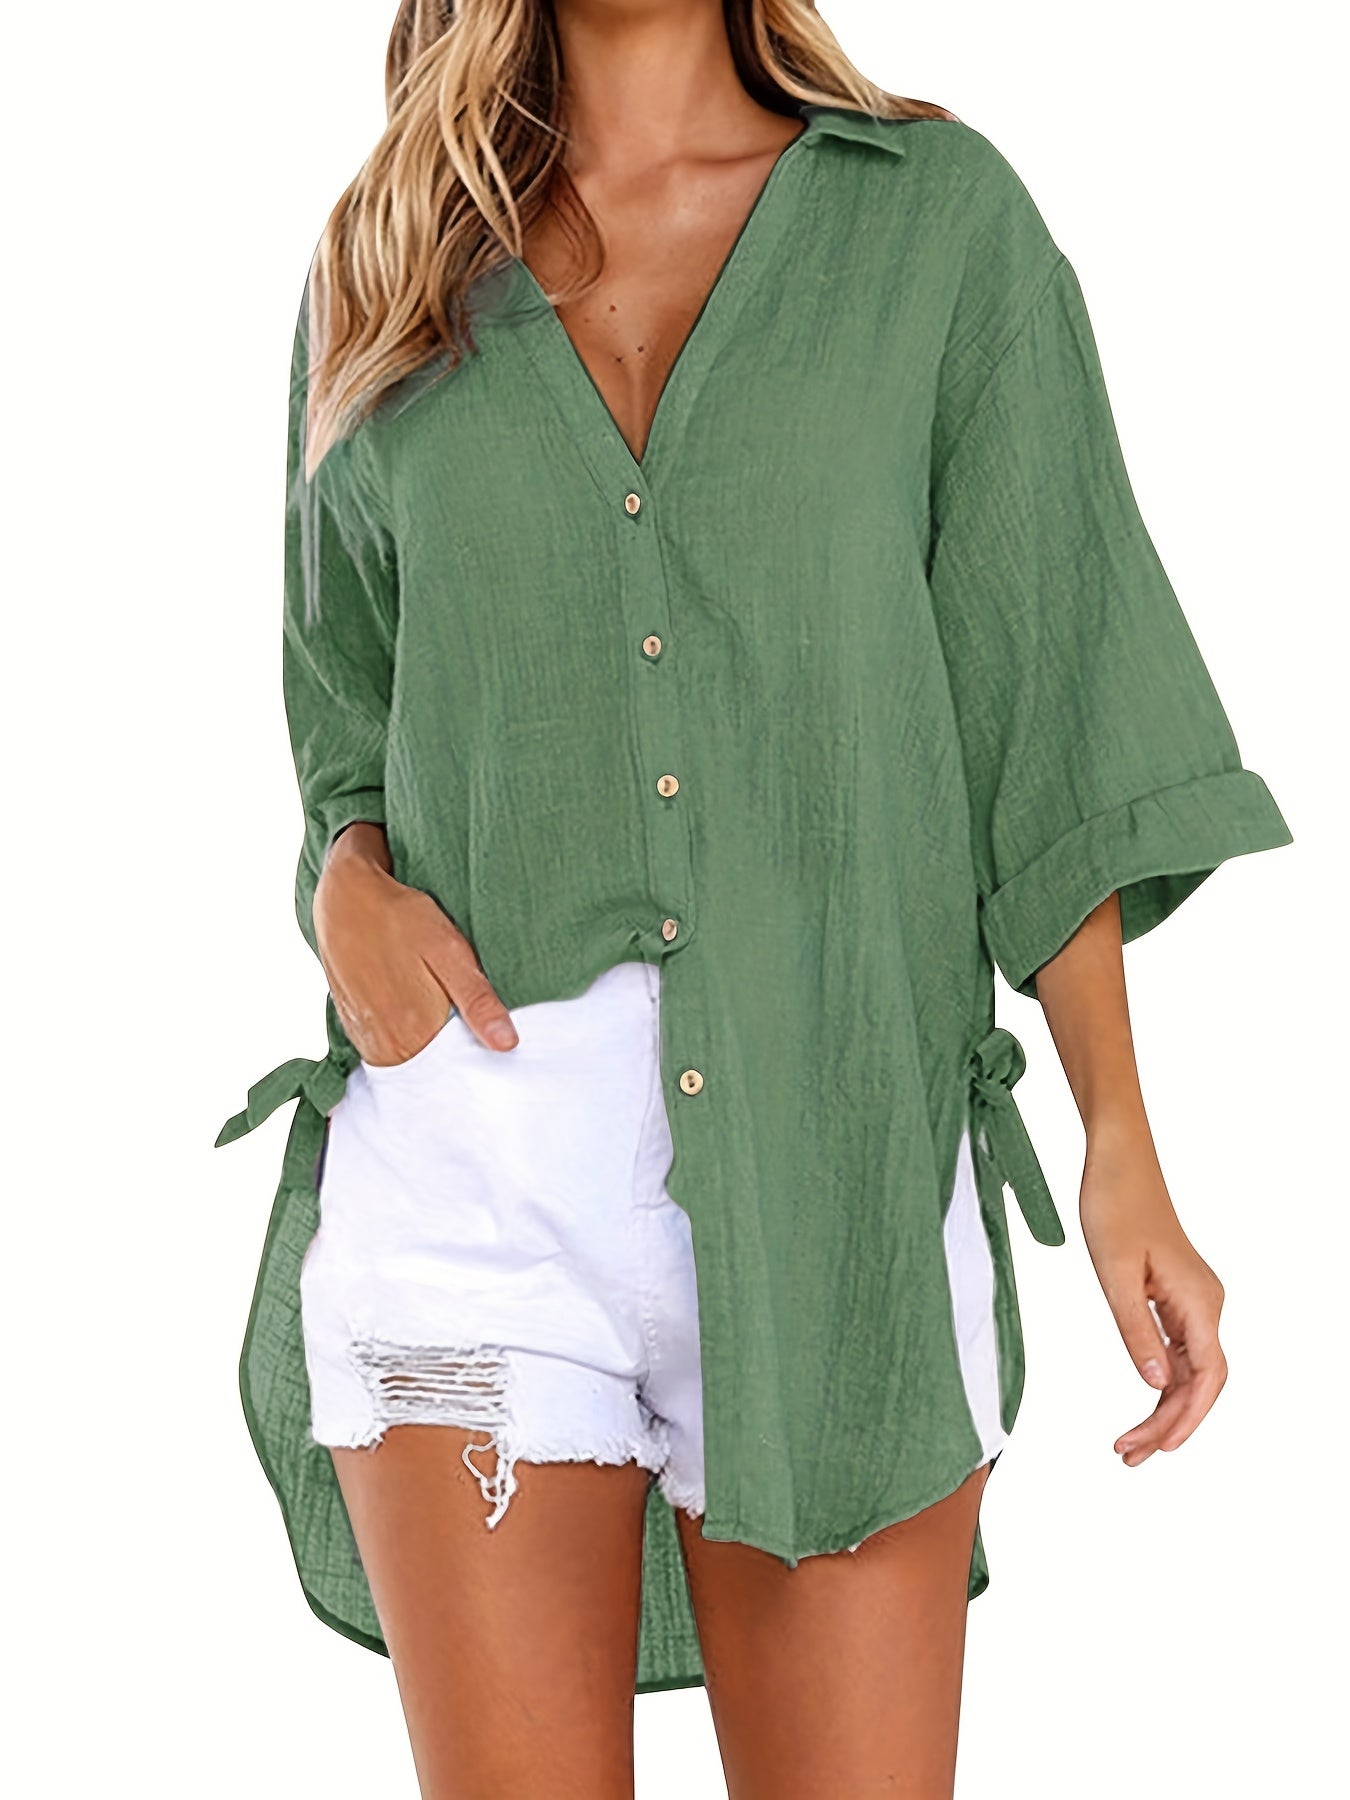 Solid Color V Neck Blouse, Casual Half Sleeve Blouse